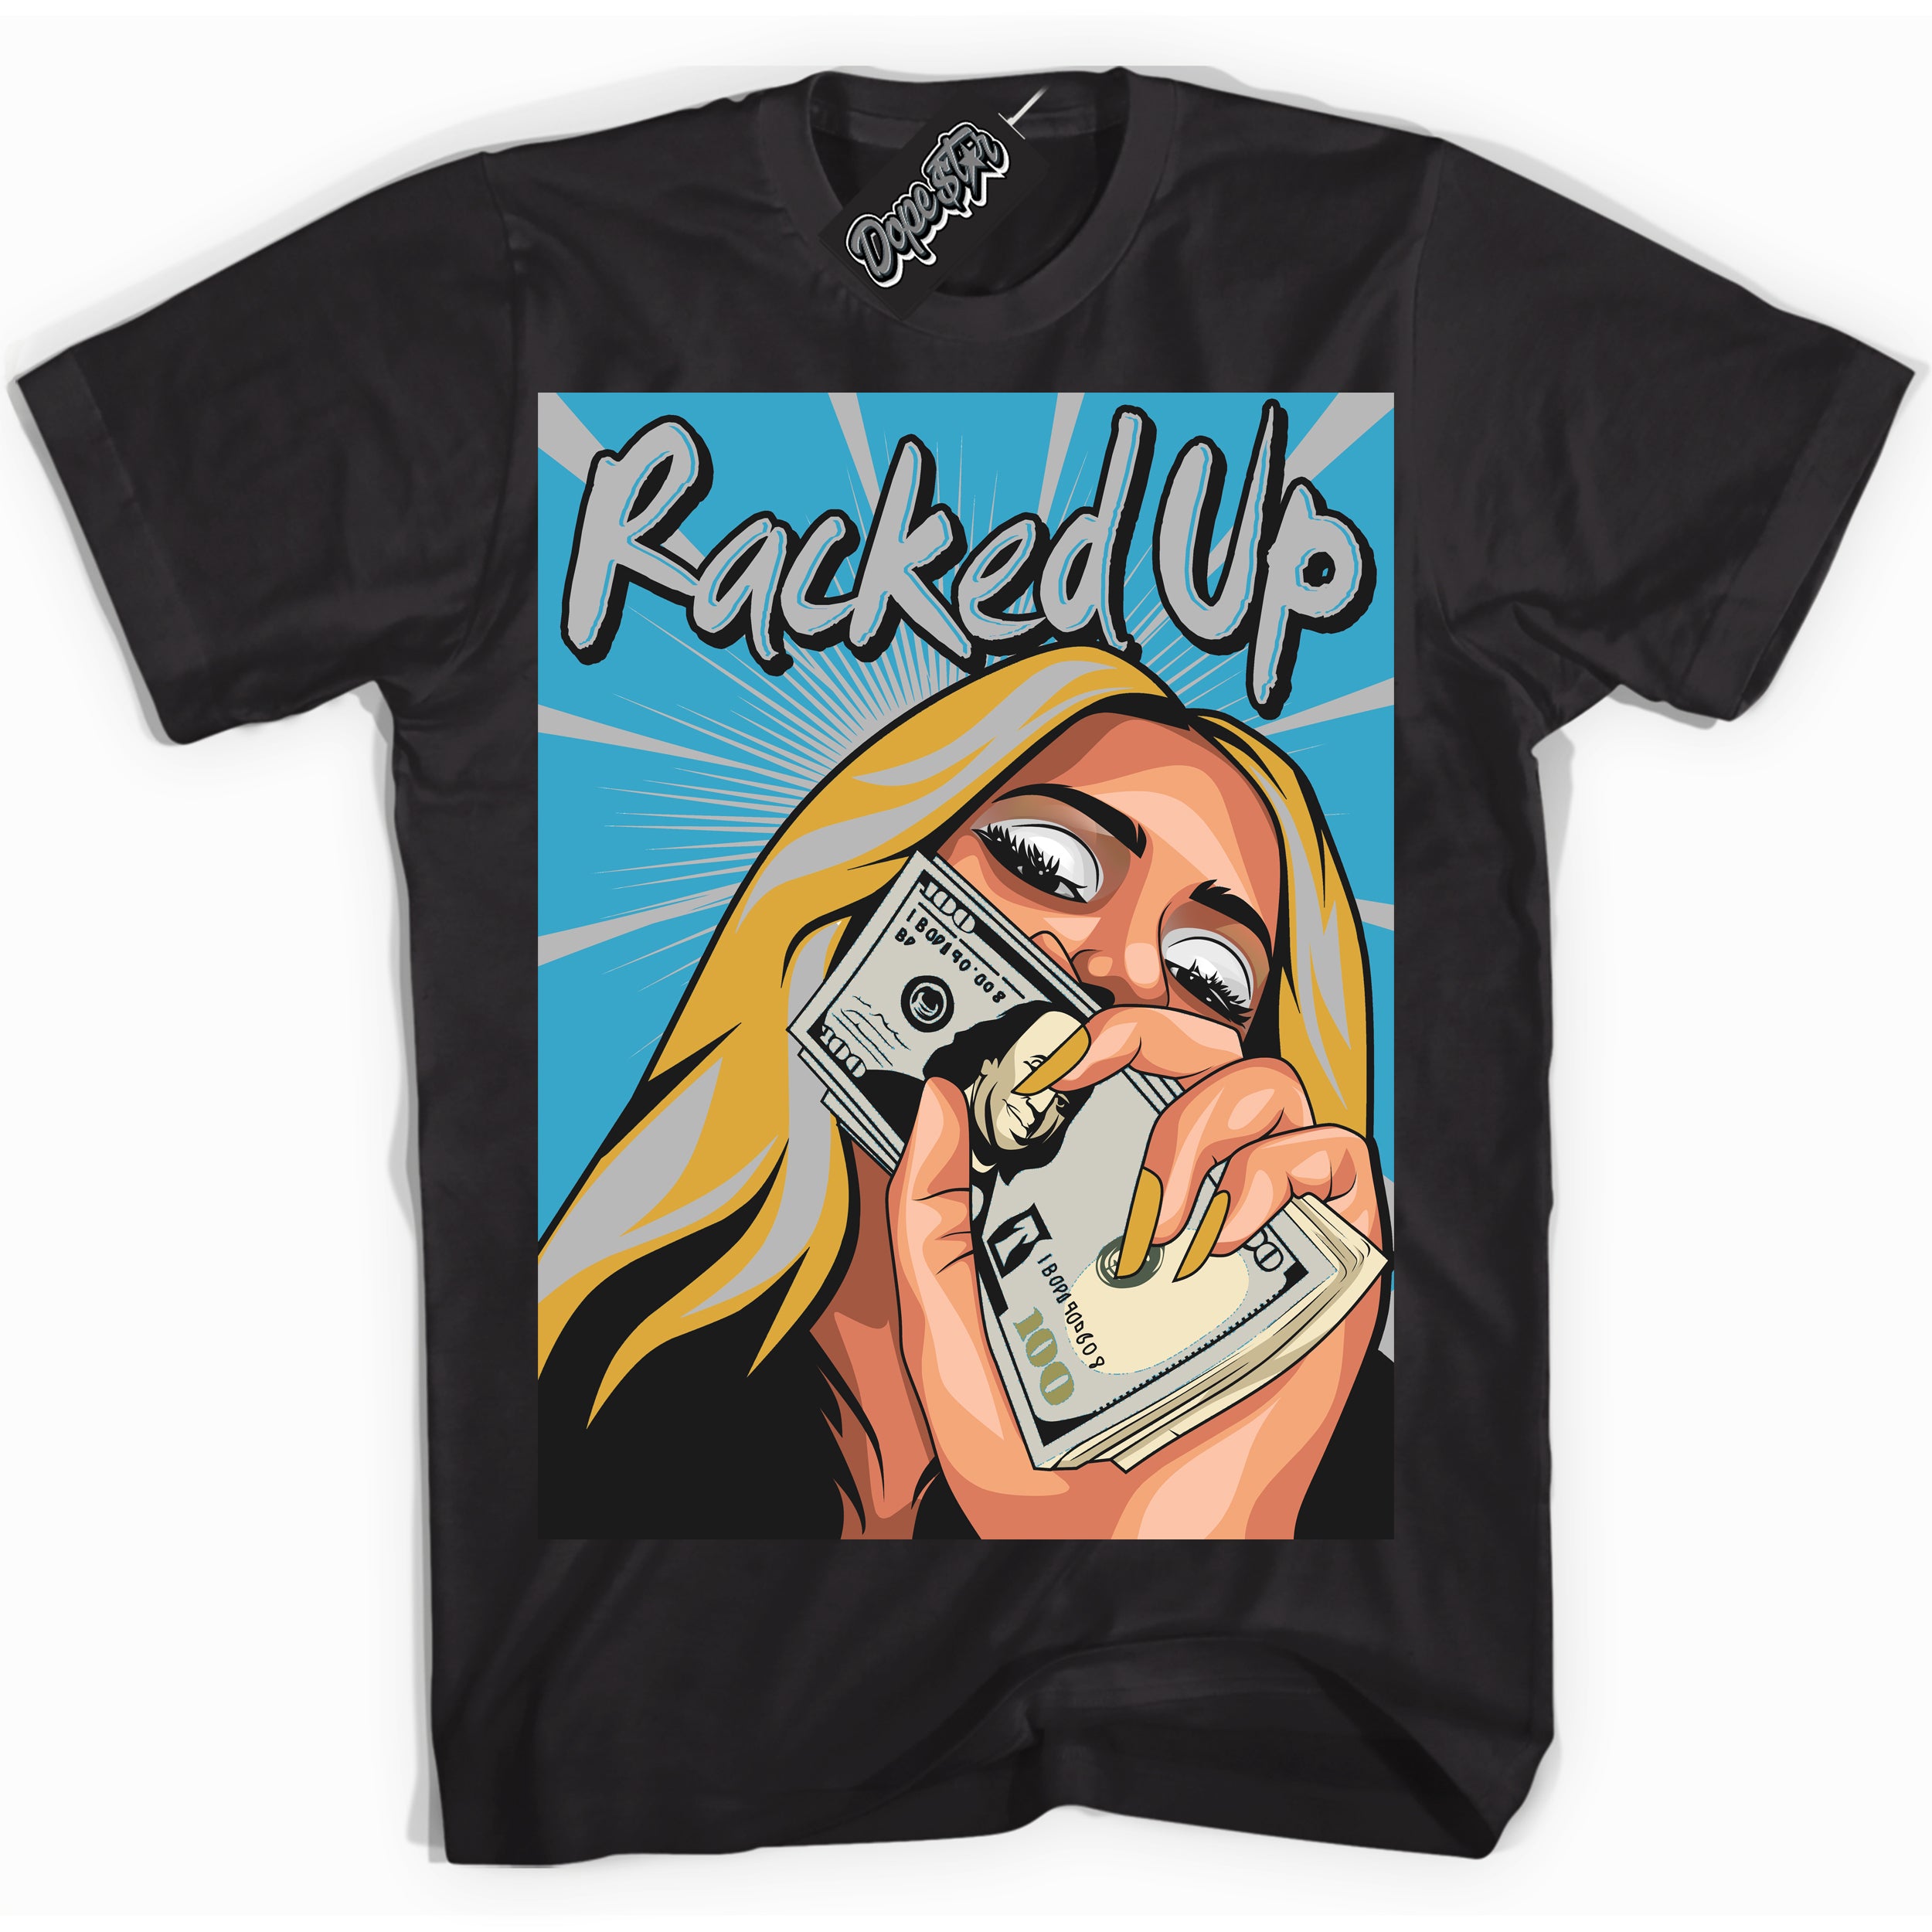 Cool Black Shirt with “ Racked Up” design that perfectly matches Aqua 5s Sneakers.